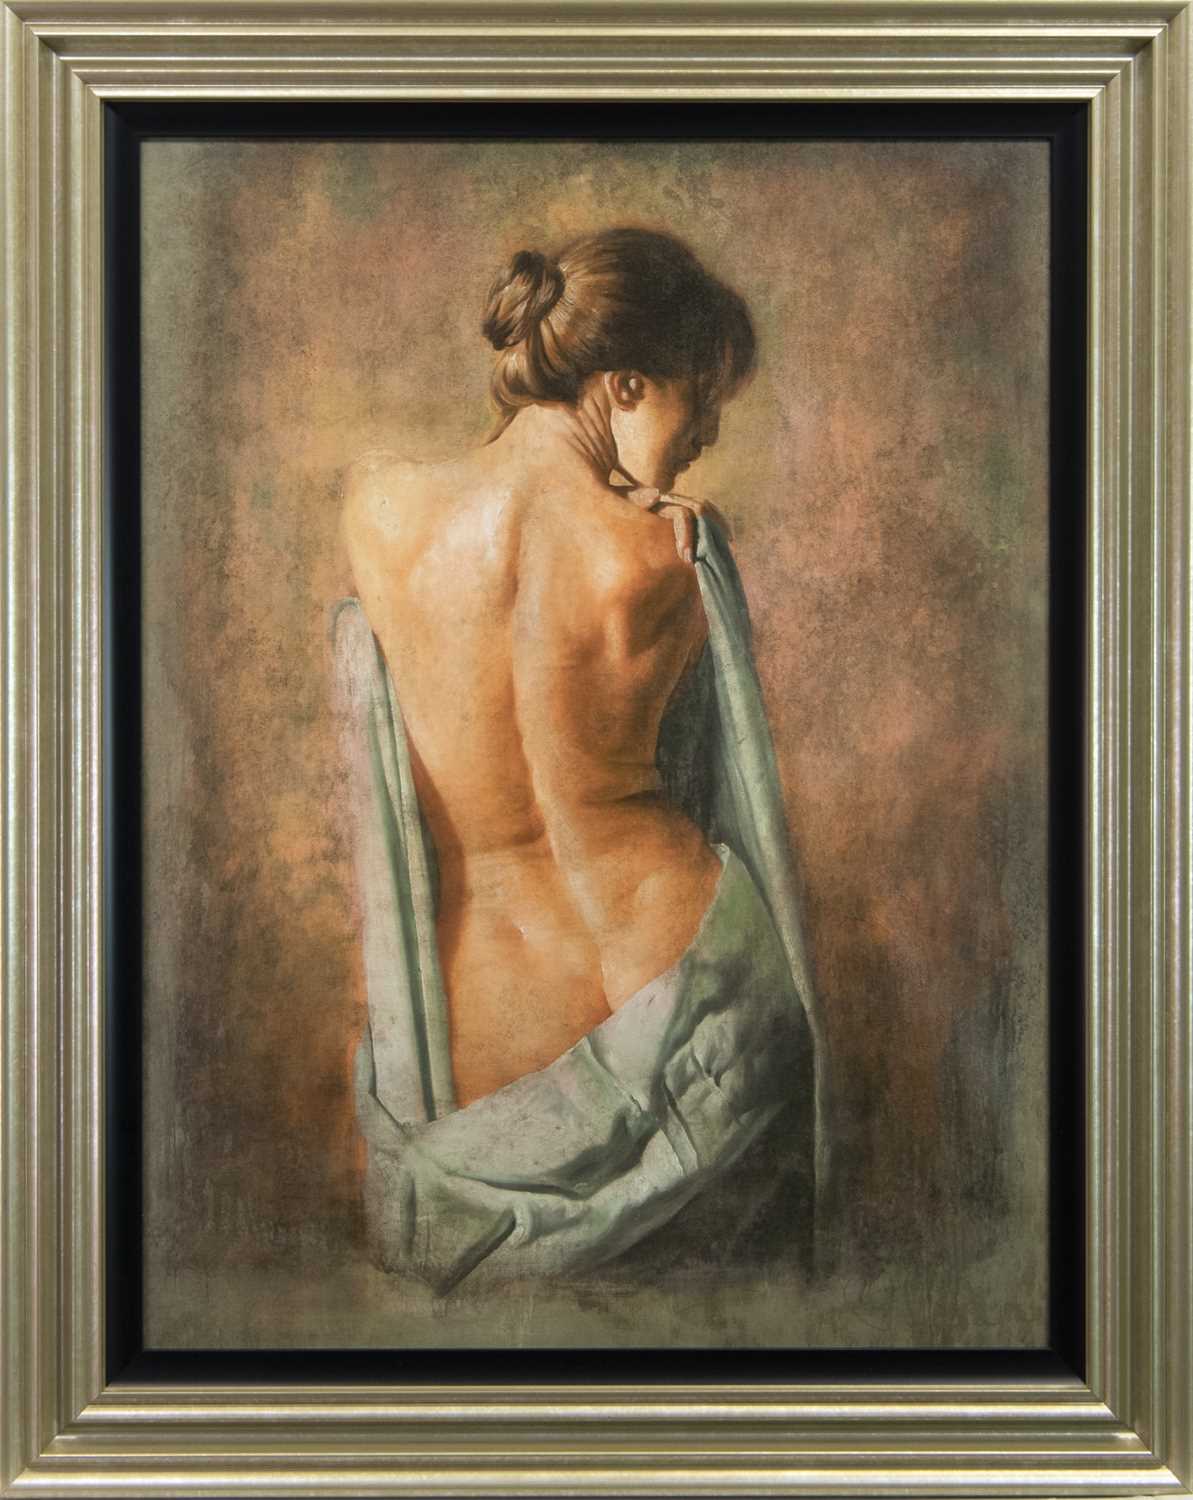 Lot 88 - OVER THE SHOULDER, A GICLEE PRINT